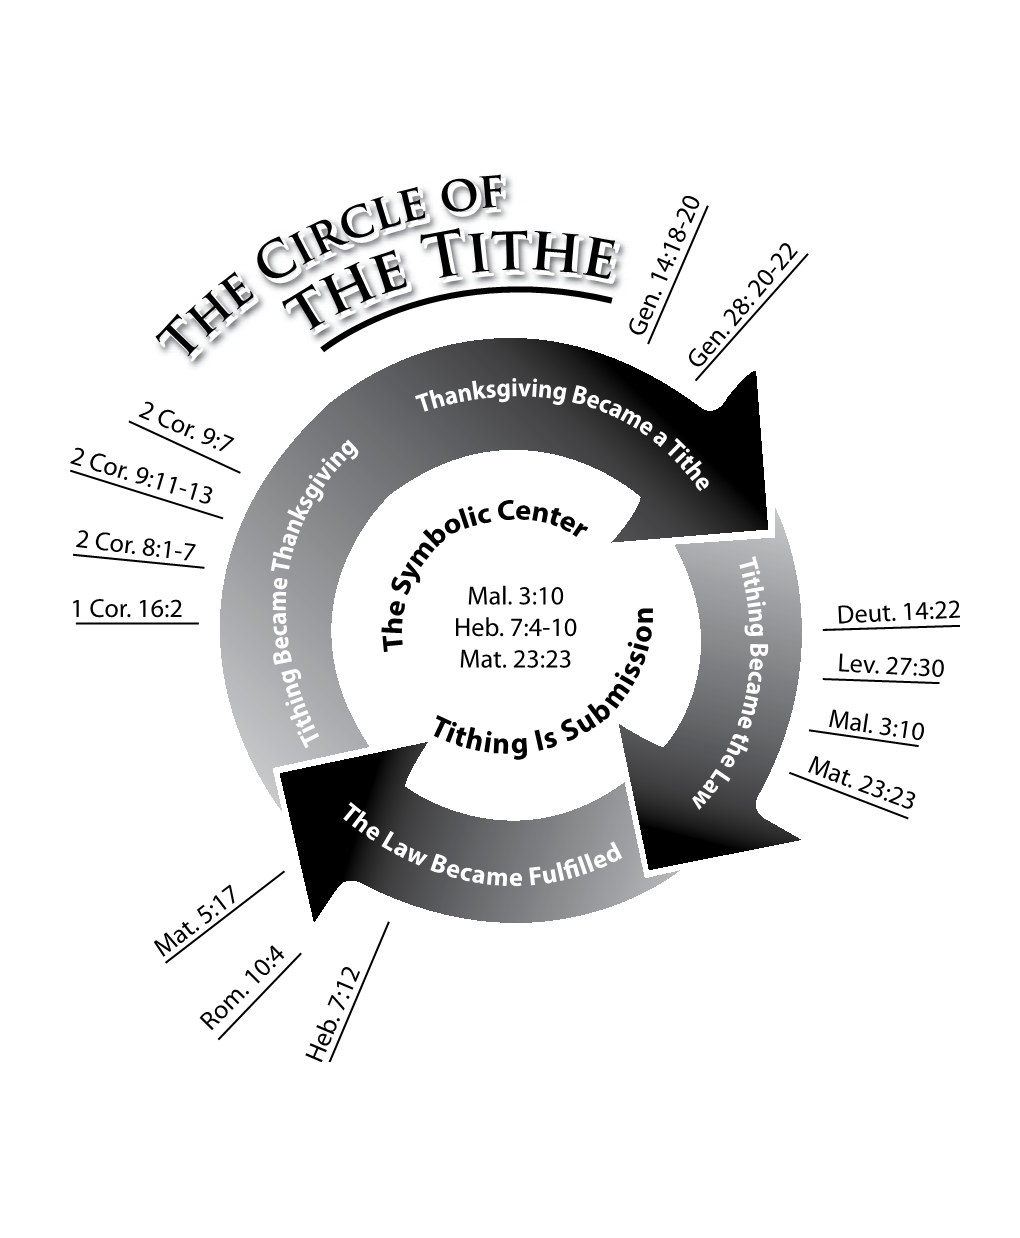 The Circle of the Tithe